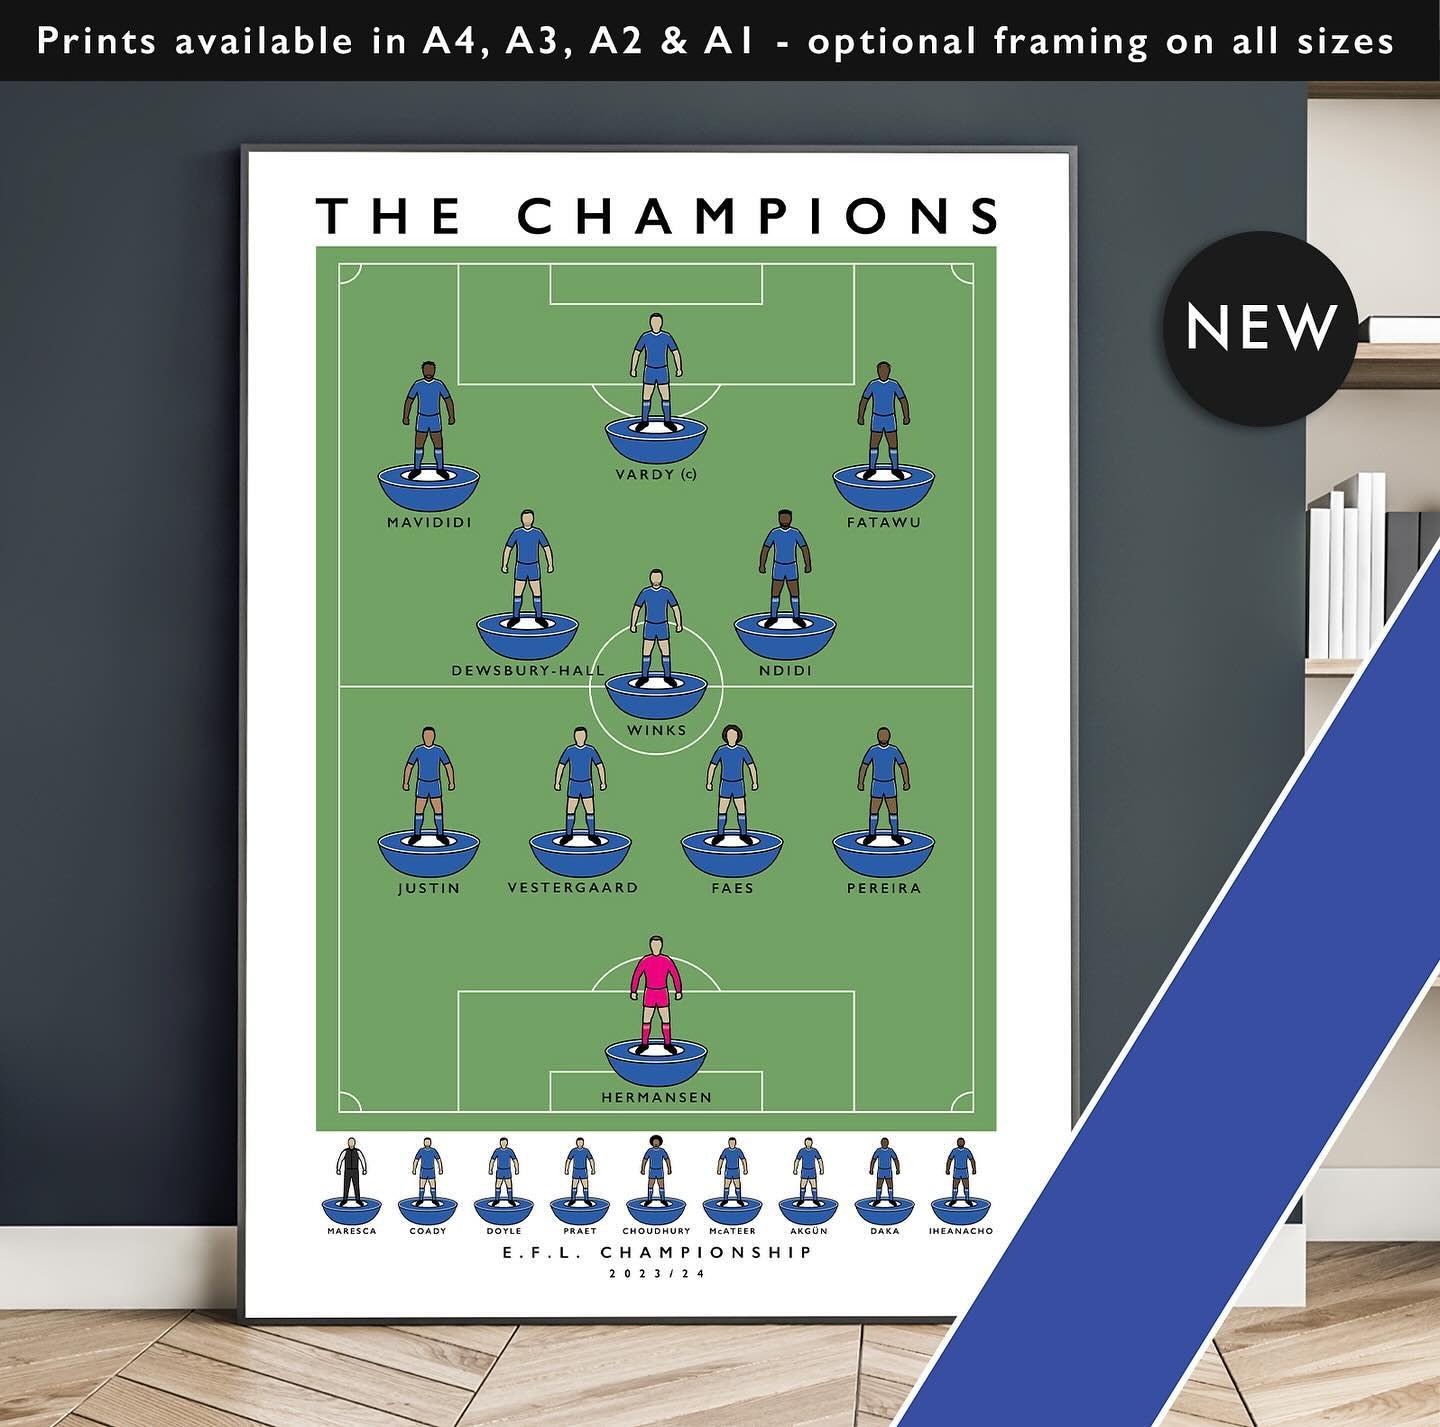 NEW: Leicester City The Champions 23/24 

Prints available in A4, A3, A2 &amp; A1 with optional framing 

Get 10% off until midnight with the discount code
THE-FOXES

Shop now: matthewjiwood.com/subbuteo-xis/l&hellip;

#lcfc #FOXES #Leicester